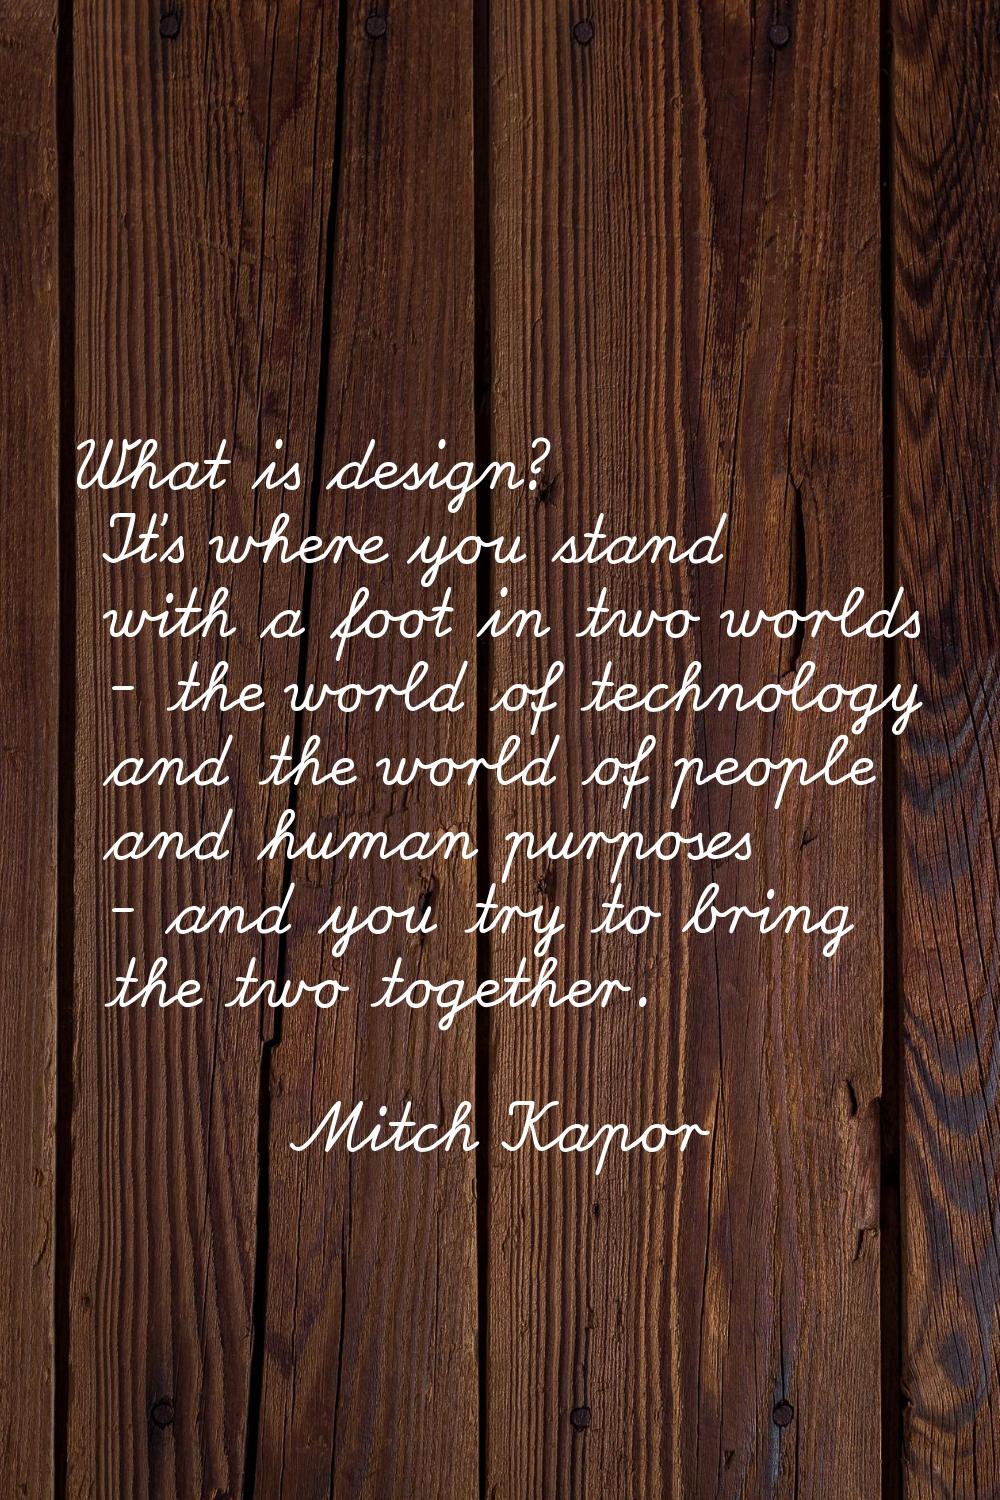 What is design? It's where you stand with a foot in two worlds - the world of technology and the wo